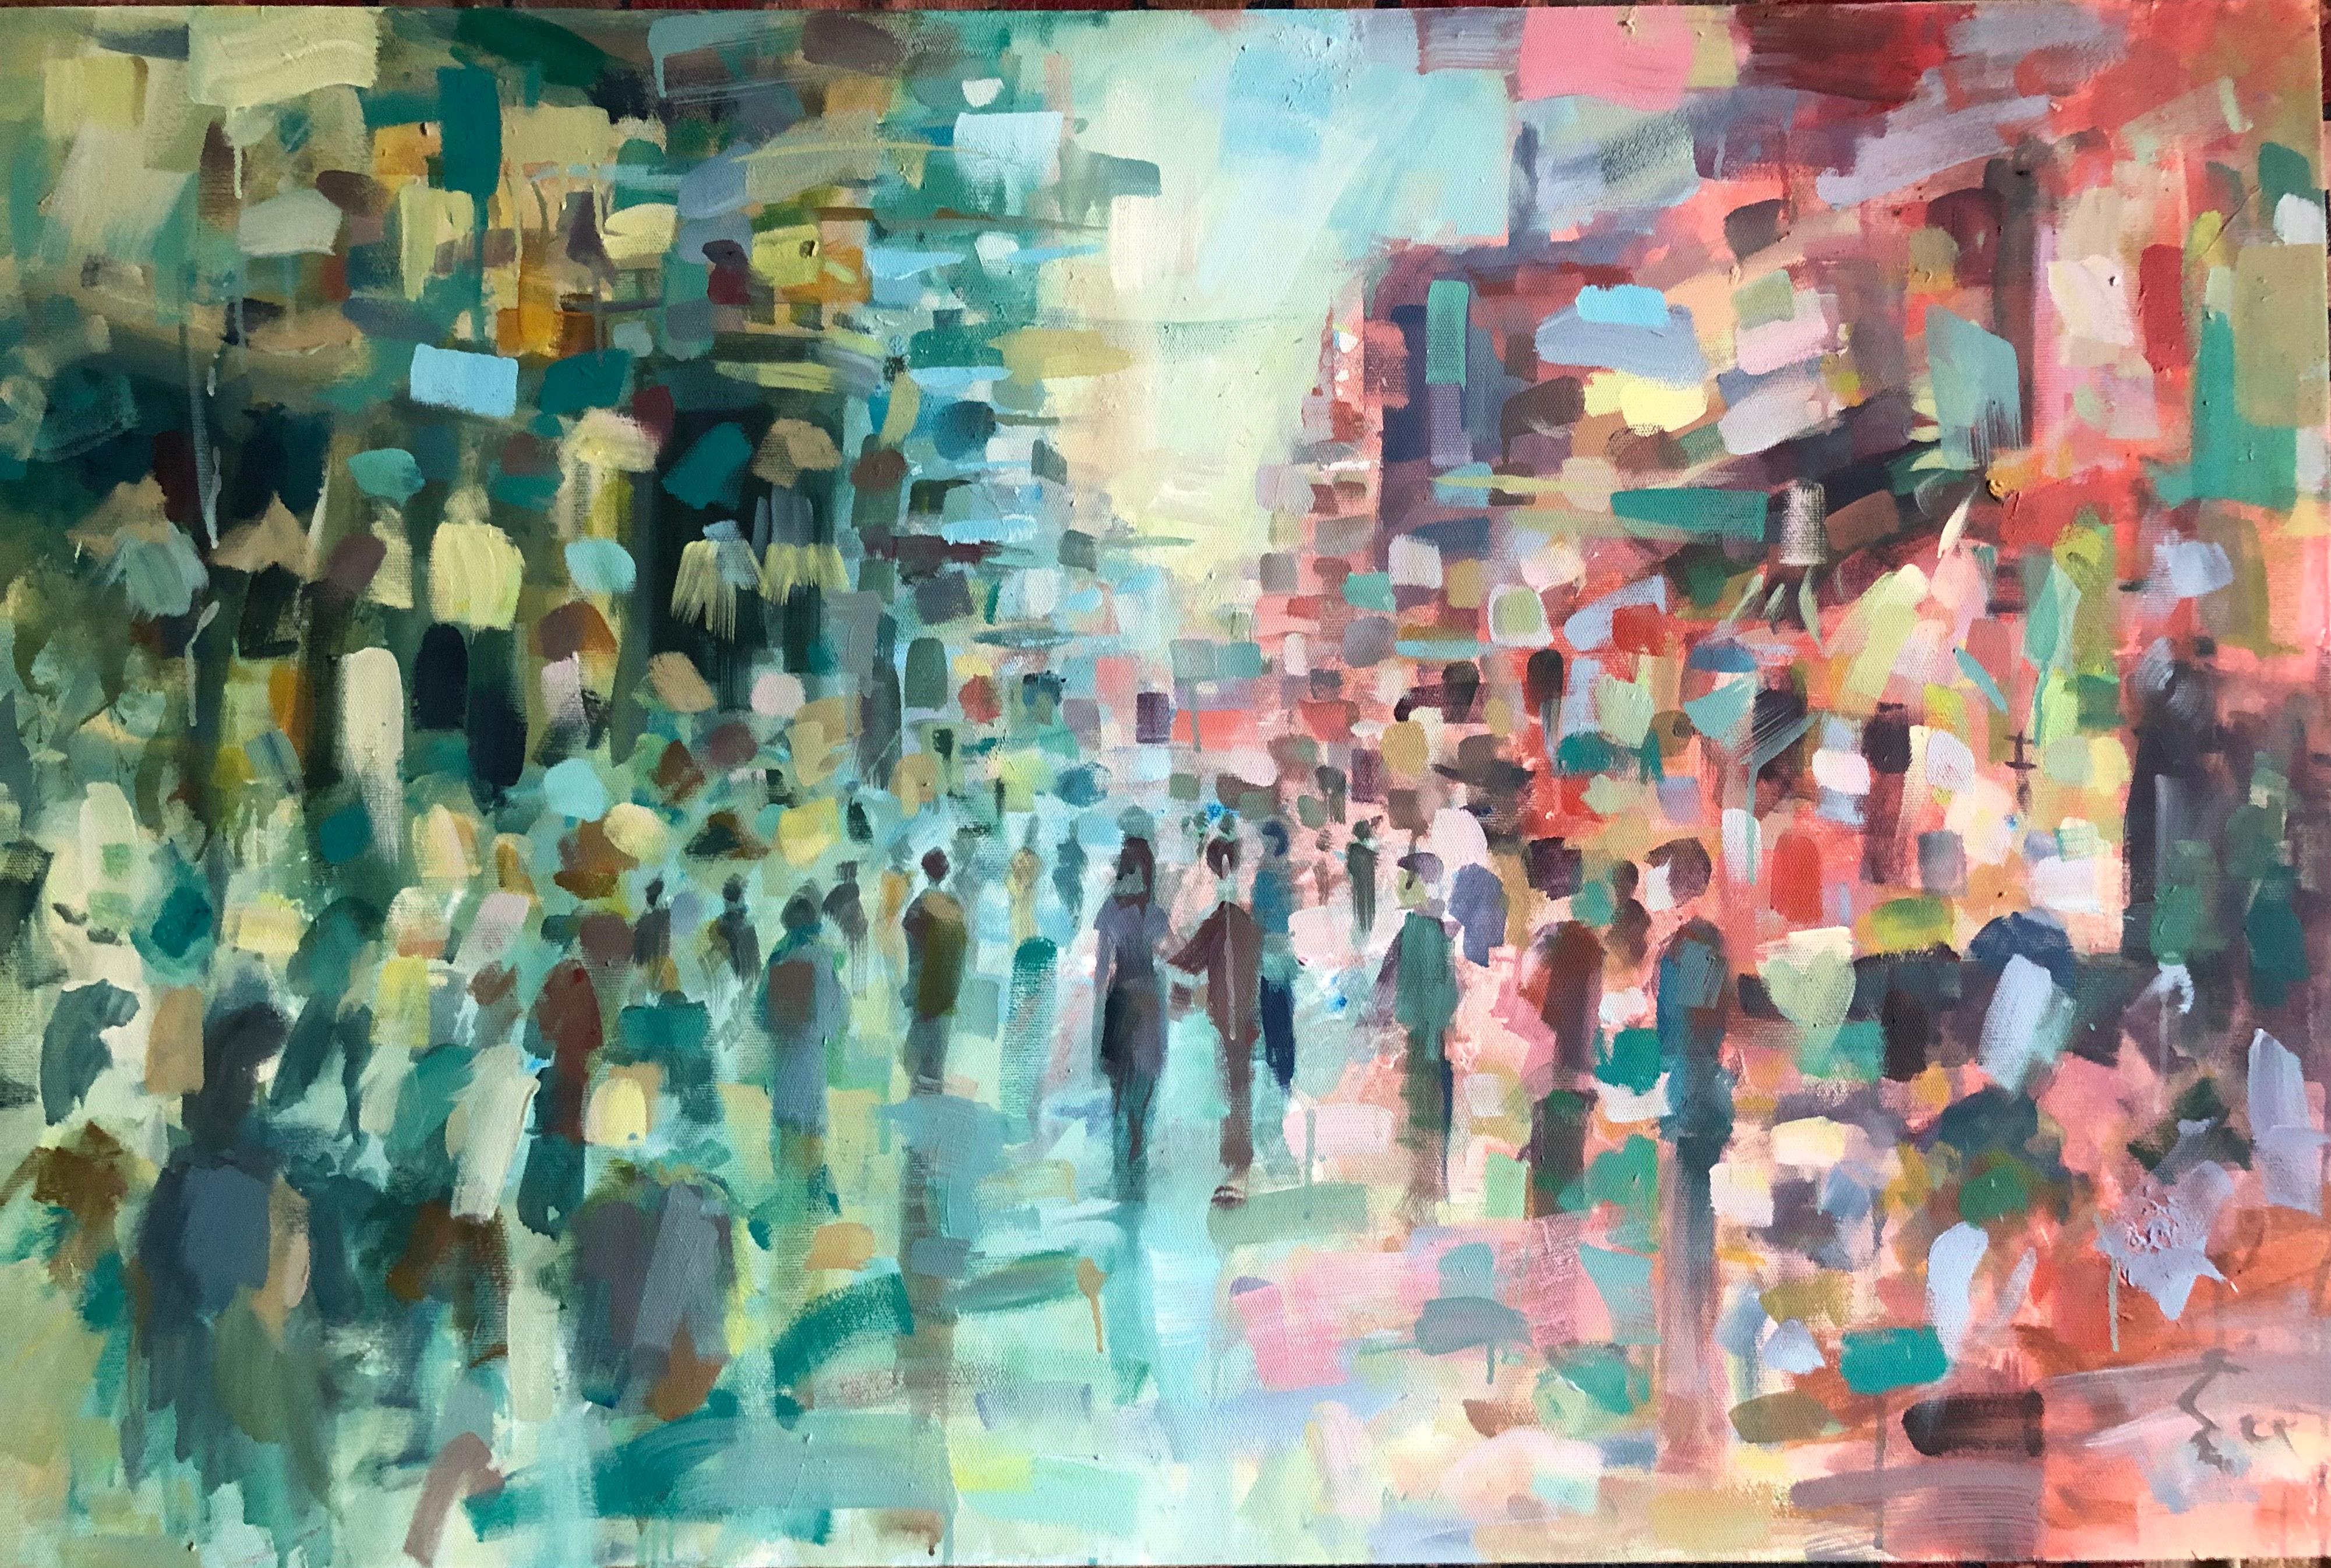 "El Moez Street 2" Abstract Painting 31.5" x 47" inch by Ahmed Dafrawy 

Dafrawy’s fine arts academic background started in 2014 when he received the certificate of drawing course completion from the Faculty of Art & Education located in Zamalek